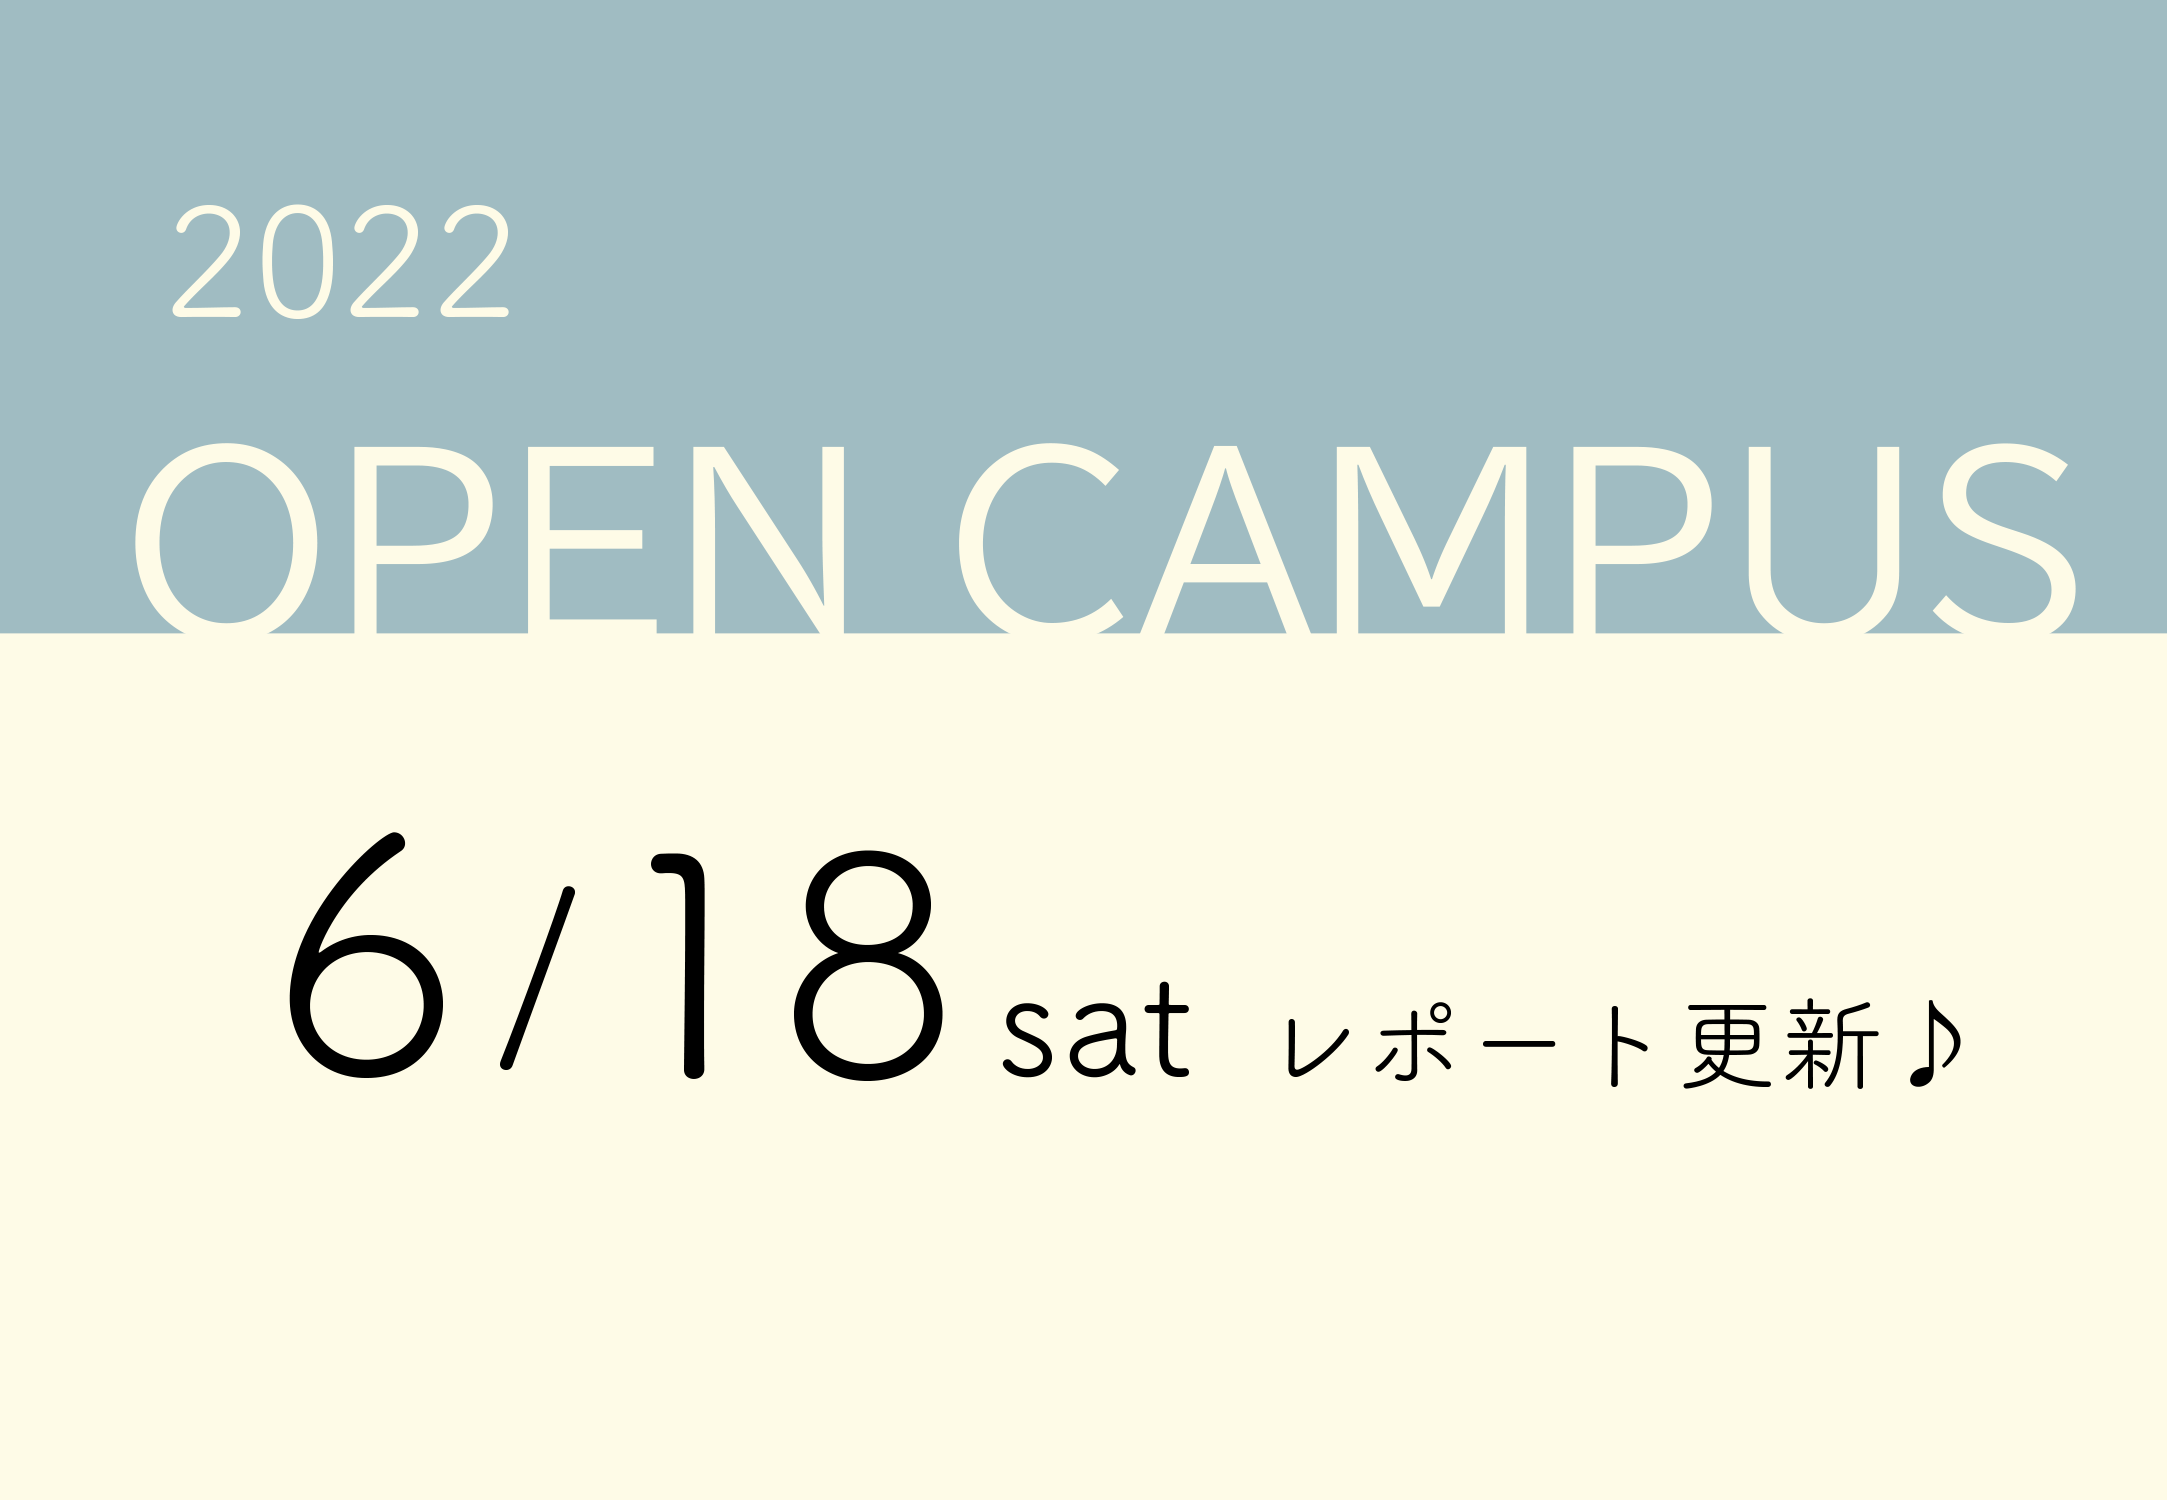 6/18 OPEN CAMPUS レポート♪【健康科学部】 サムネイル